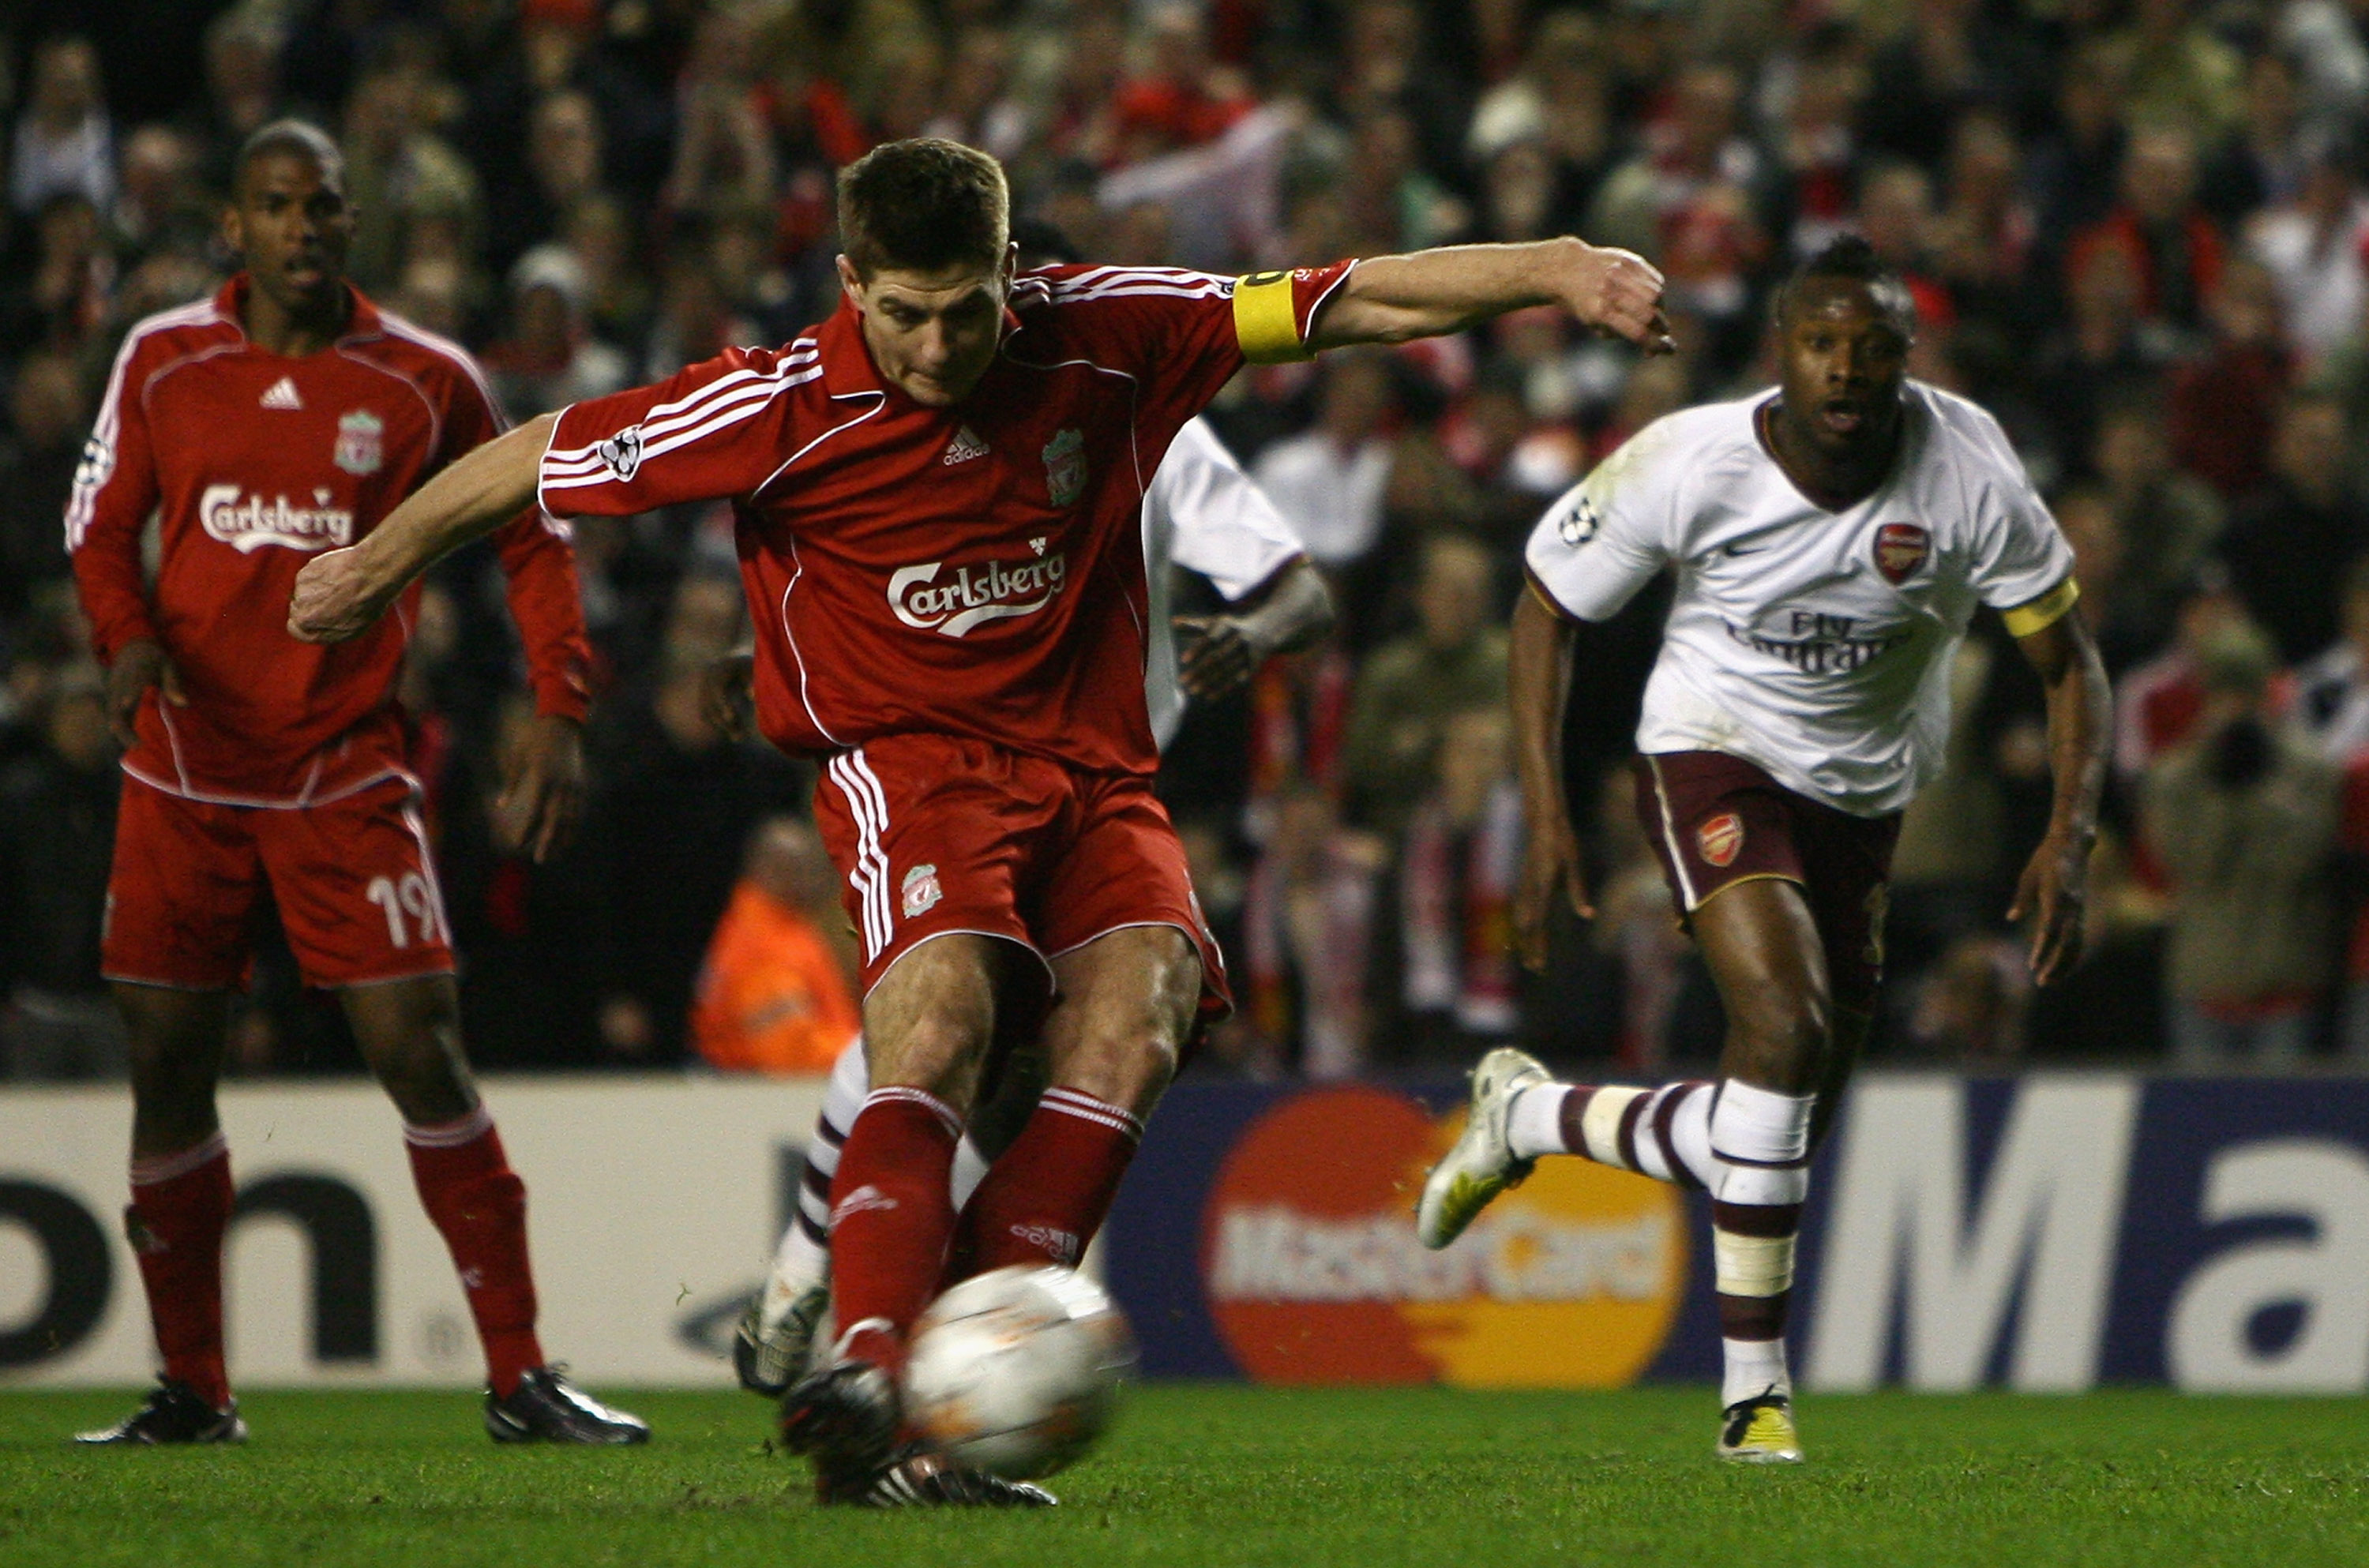 LIVERPOOL, UNITED KINGDOM - APRIL 8:  Steven Gerrard of Liverpool scores his team's third goal from the penalty spot during the UEFA Champions League Quarter Final, second leg match between Liverpool and Arsenal at Anfield on April 8, 2008 in Liverpool, E